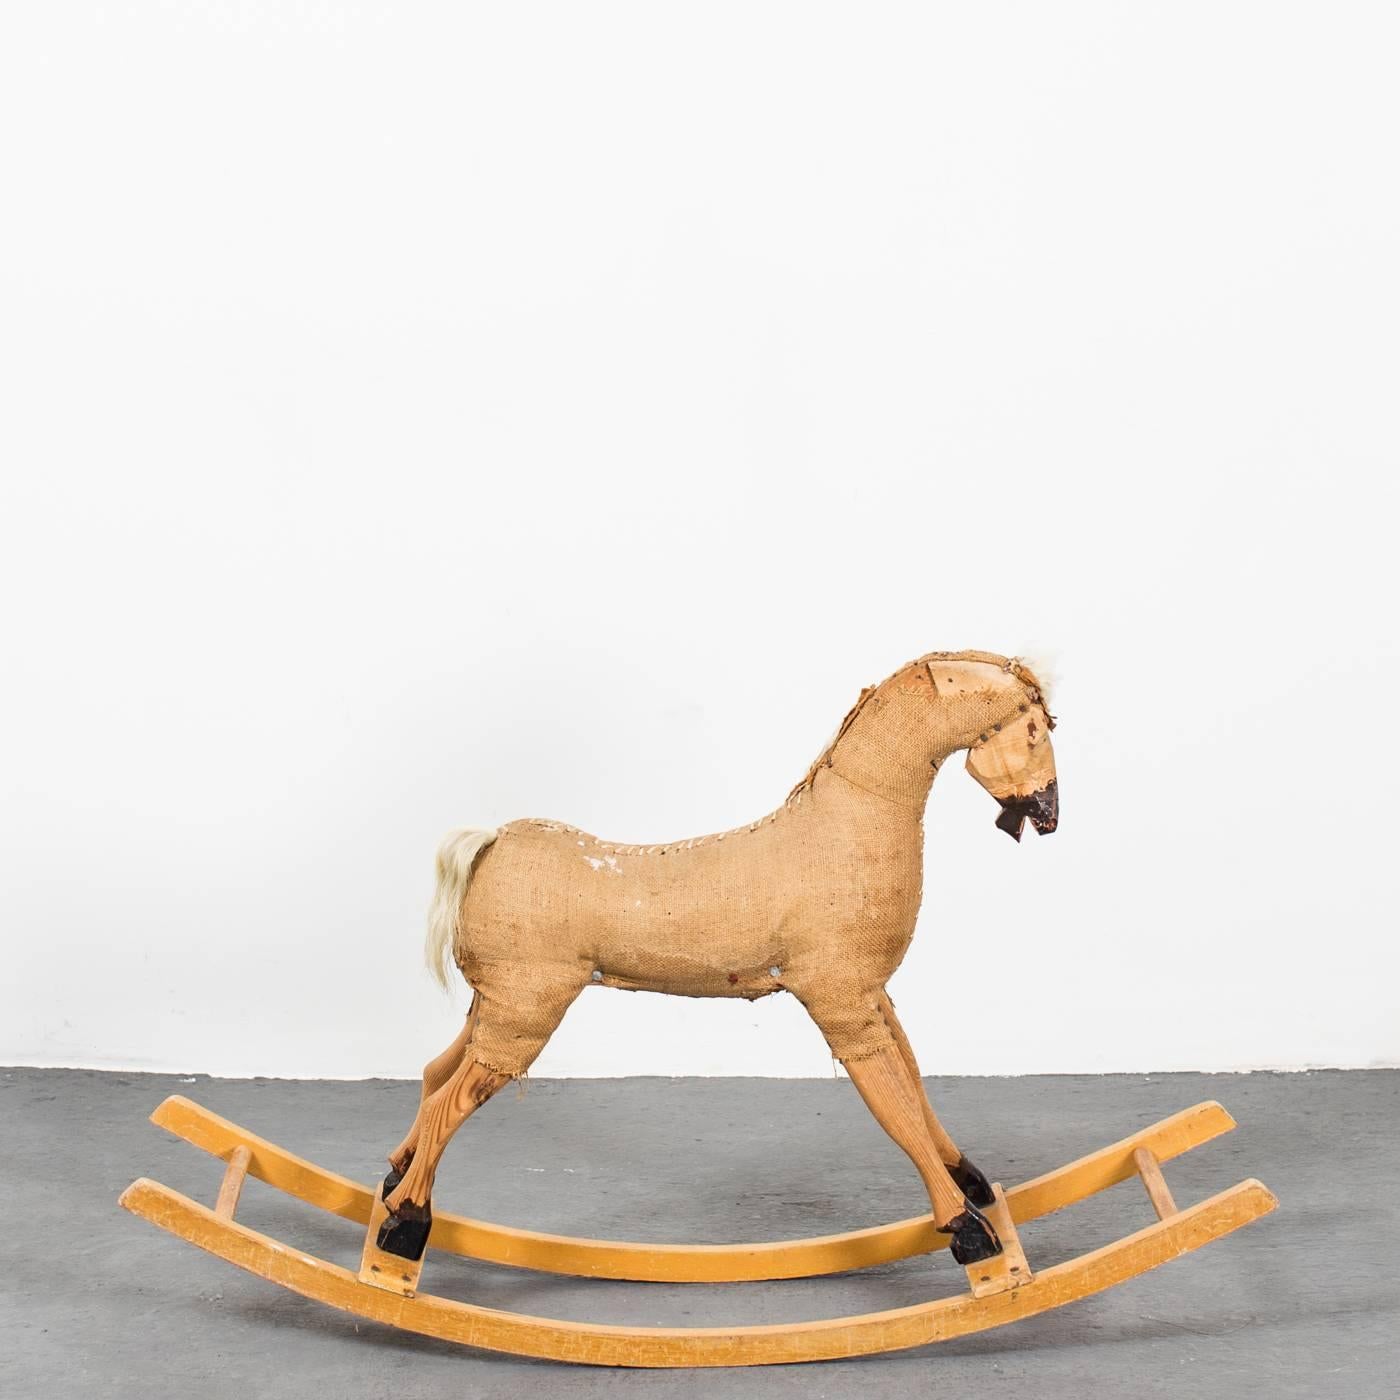 A rocking horse made during the 20th century in Sweden. Upholstered in jute with painted details standing on a wooden frame.